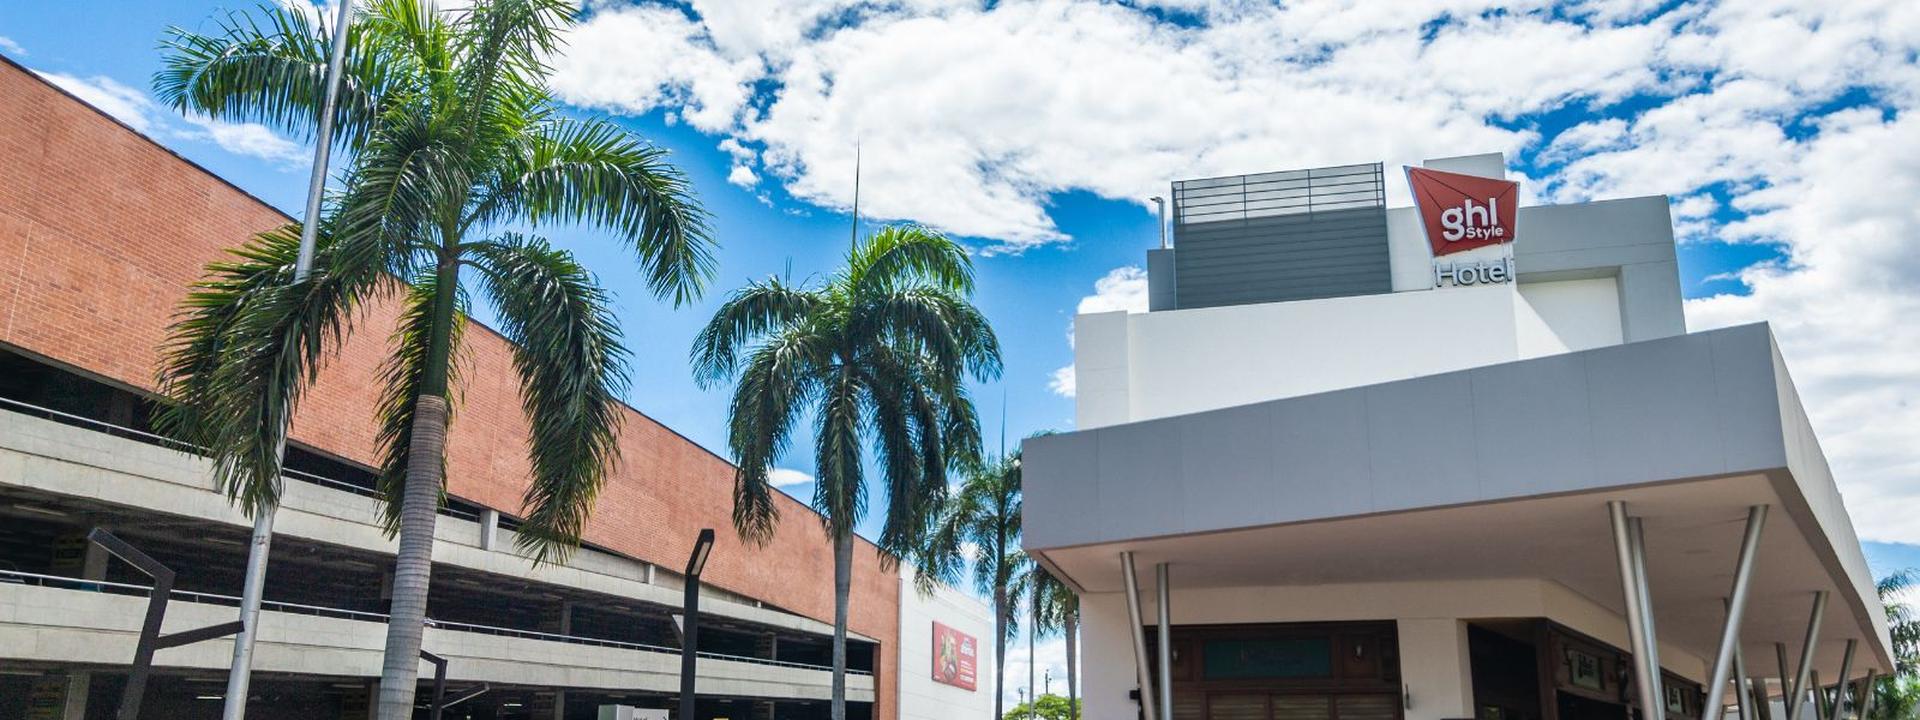 Explore the natural beauty of Neiva! GHL Hotels